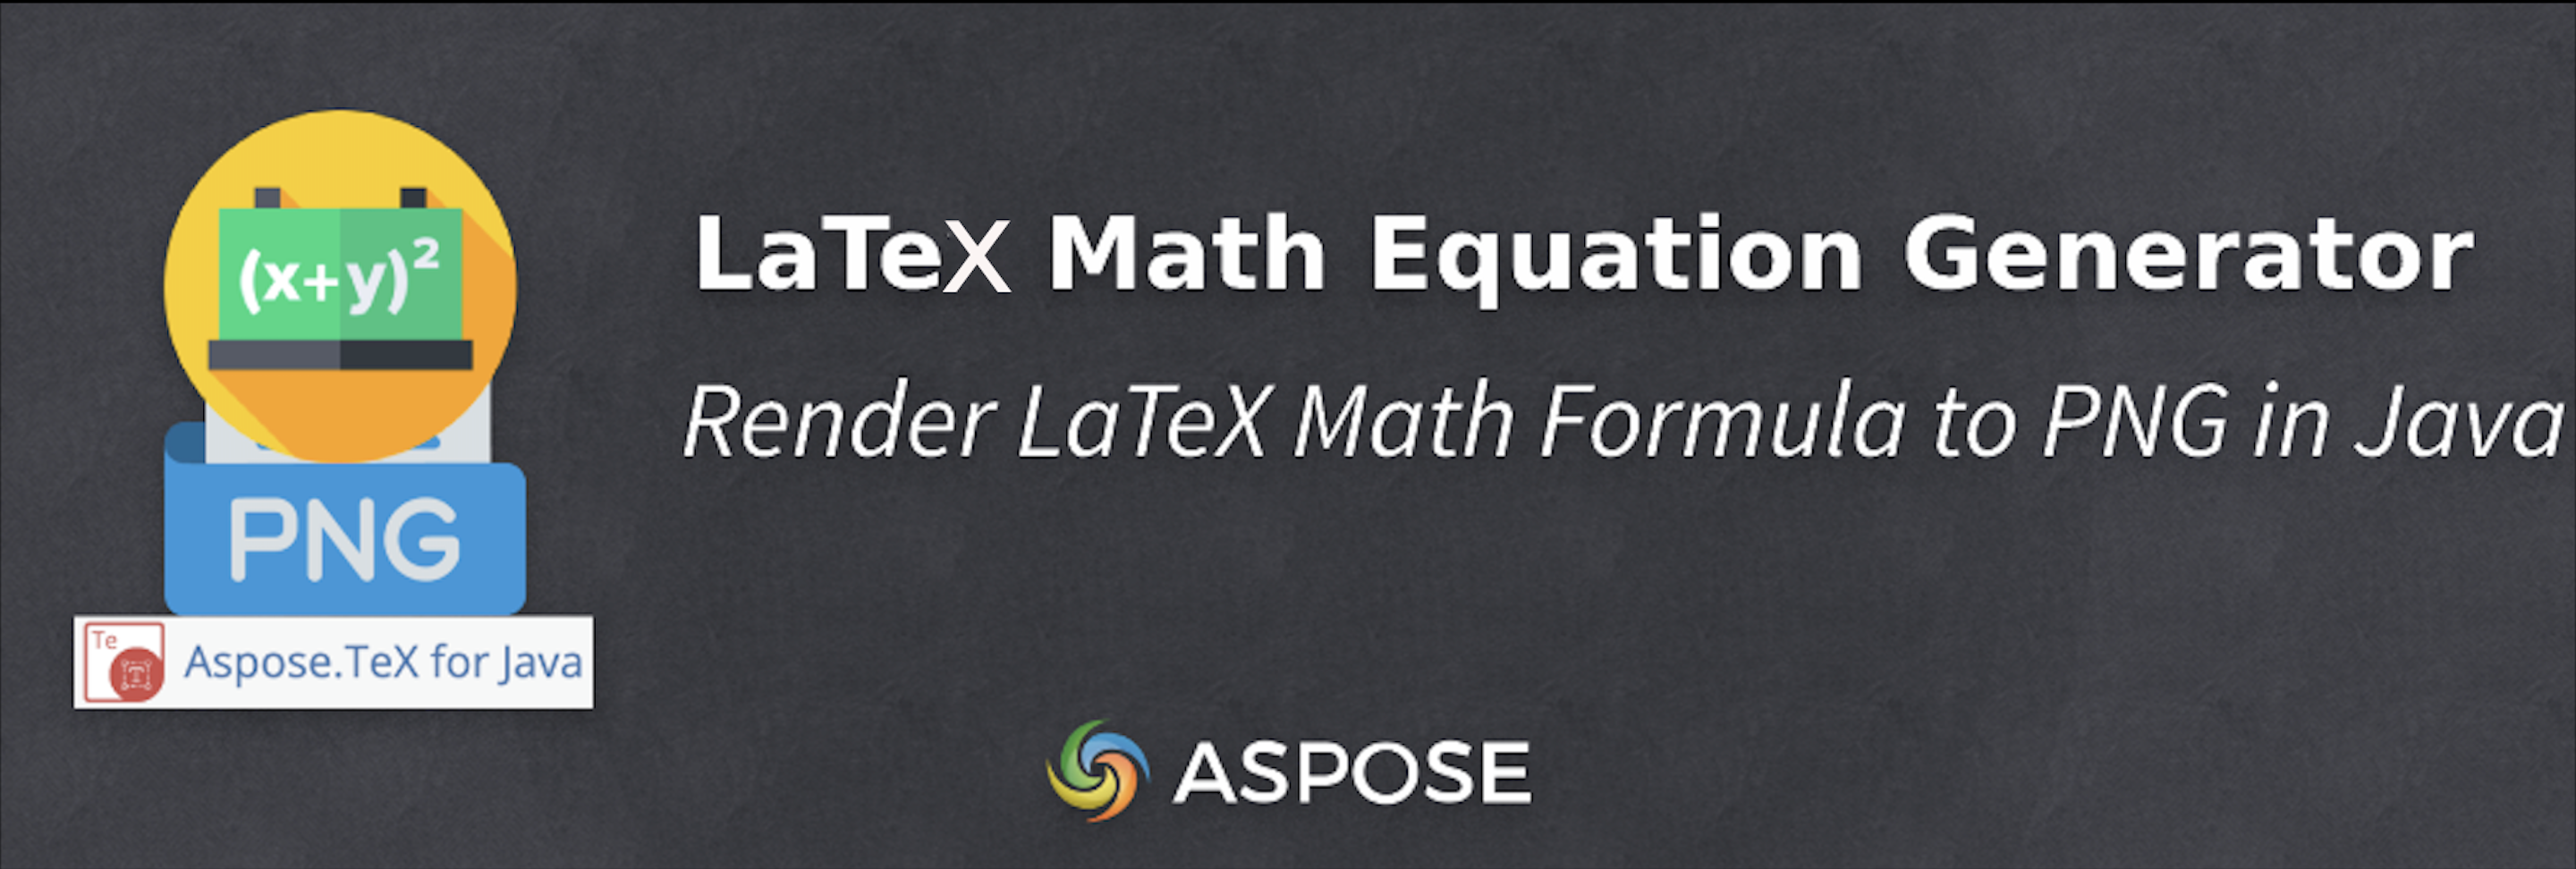 LaTeX Mathematical Expressions using LaTeX to Image API